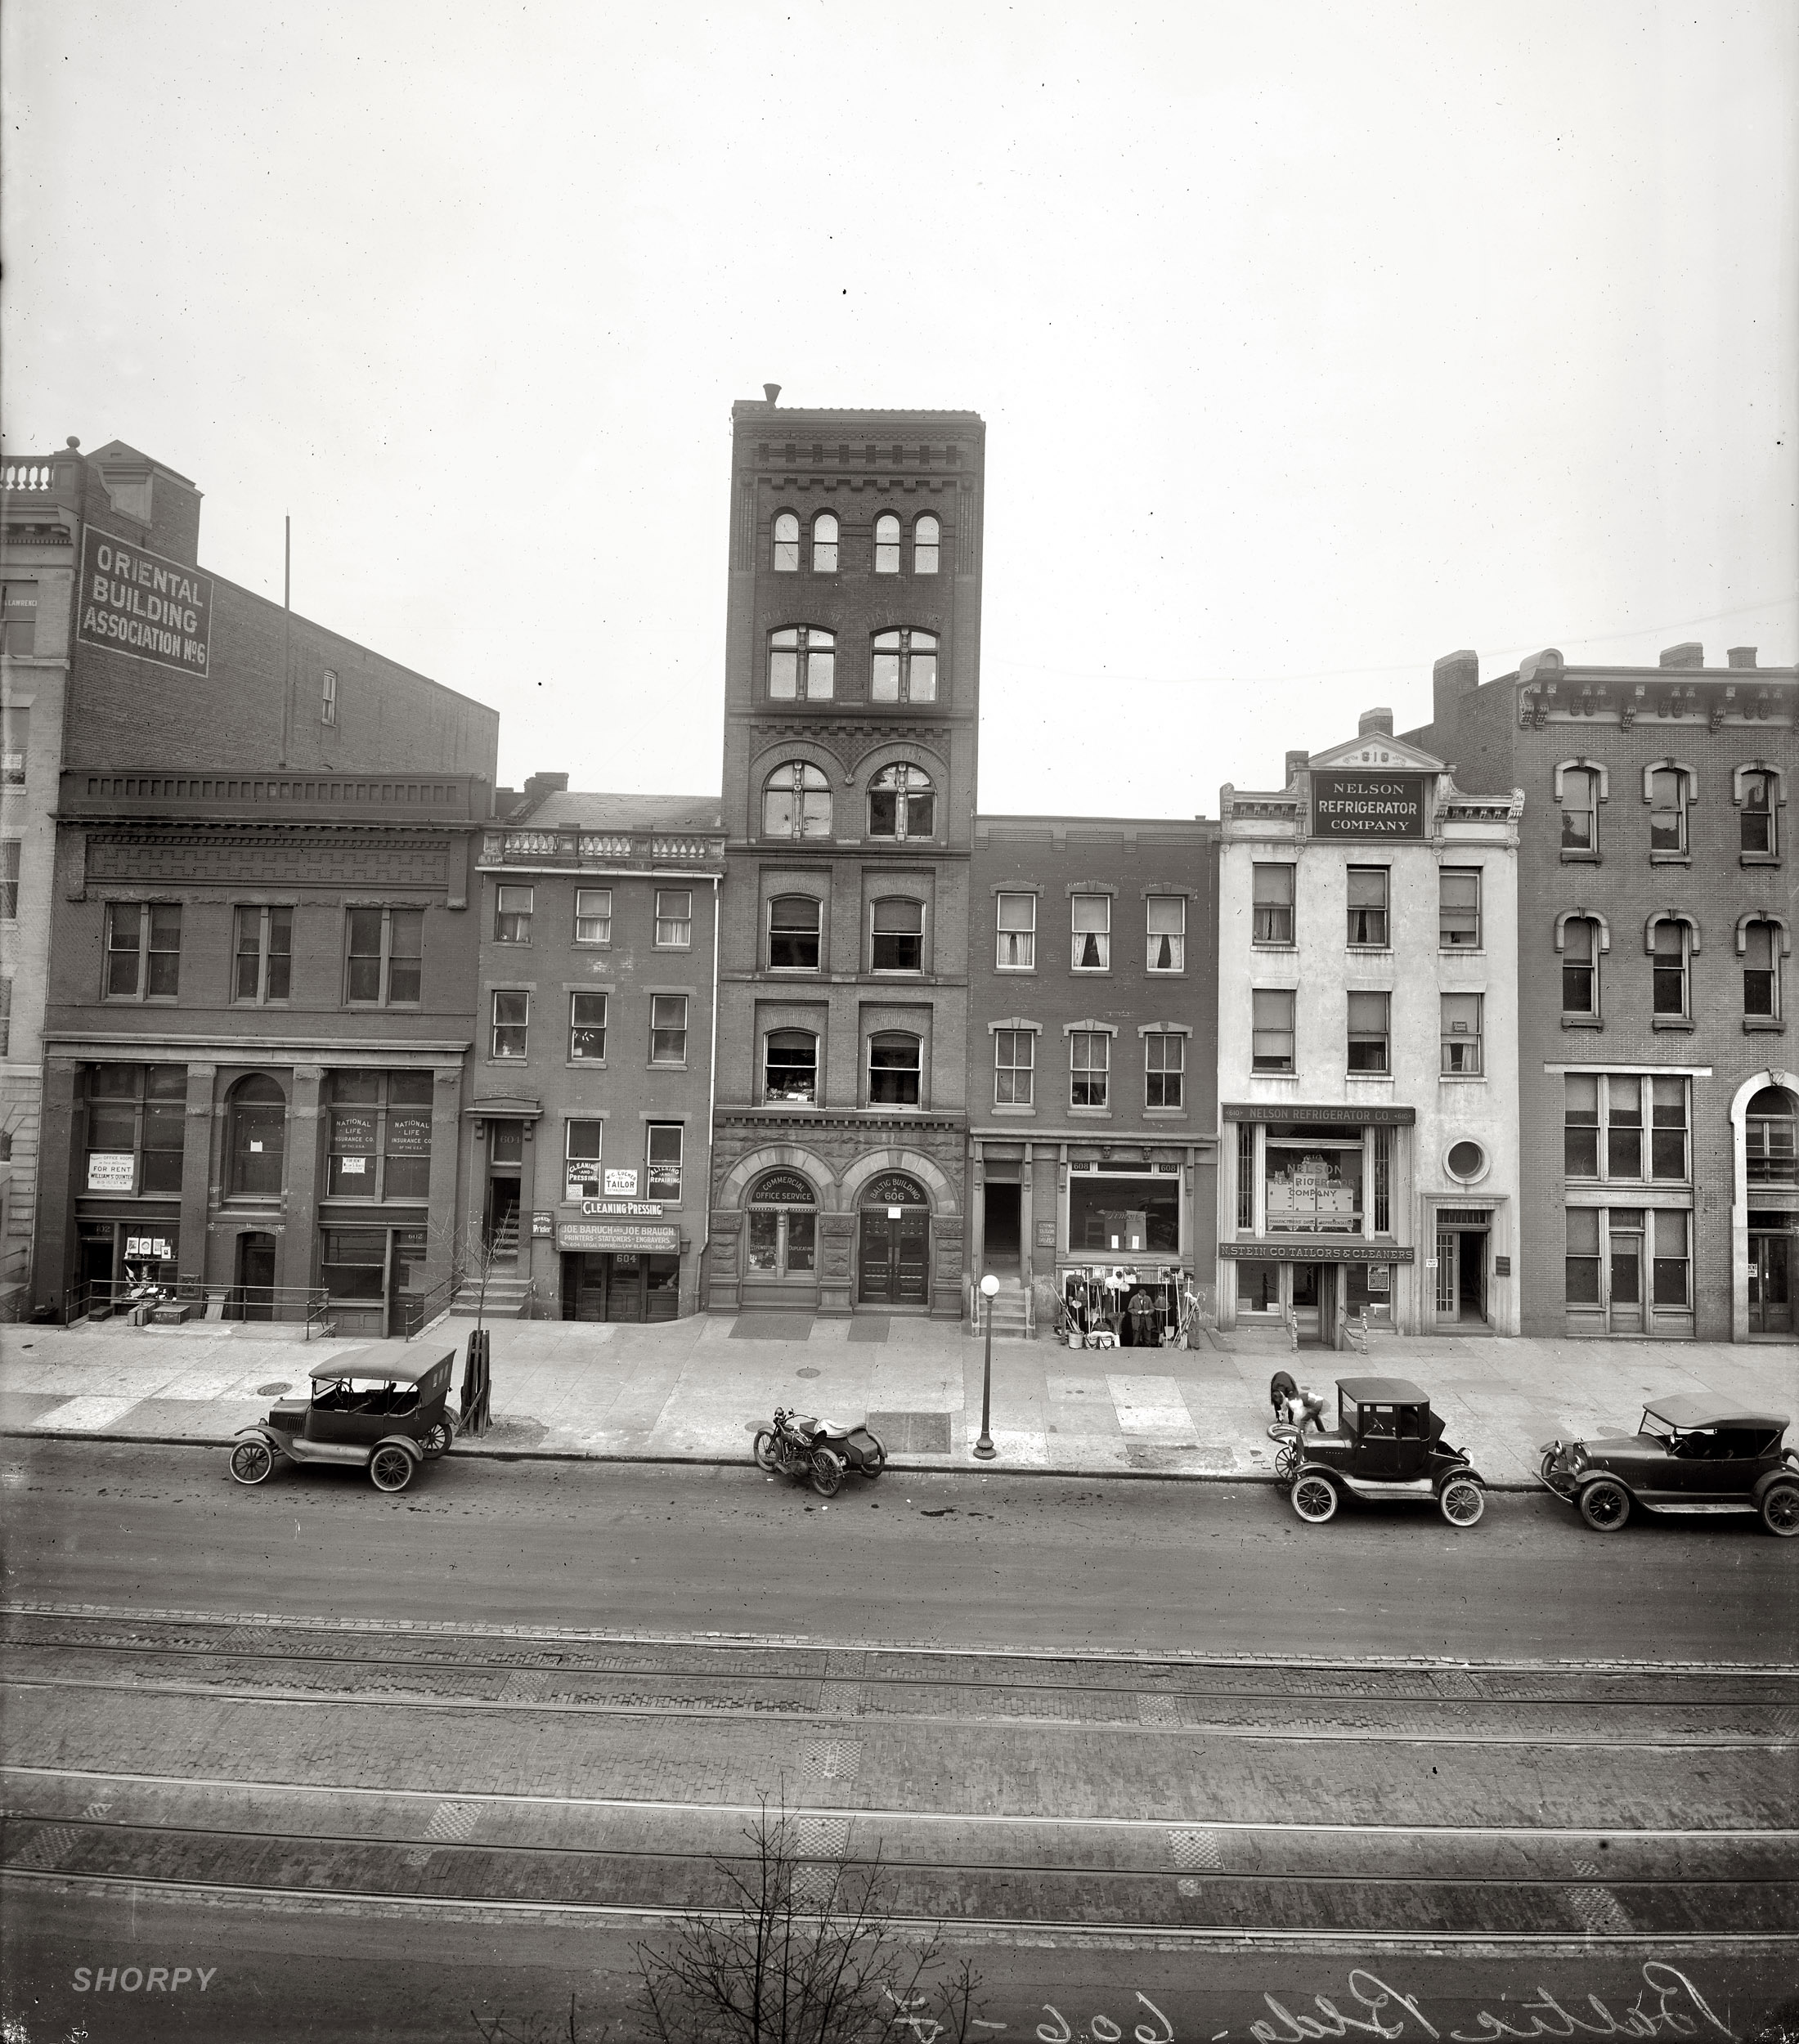 Washington, D.C., circa 1921. "Baltic Building, 606 F Street." View full size. National Photo Company Collection glass negative, Library of Congress.